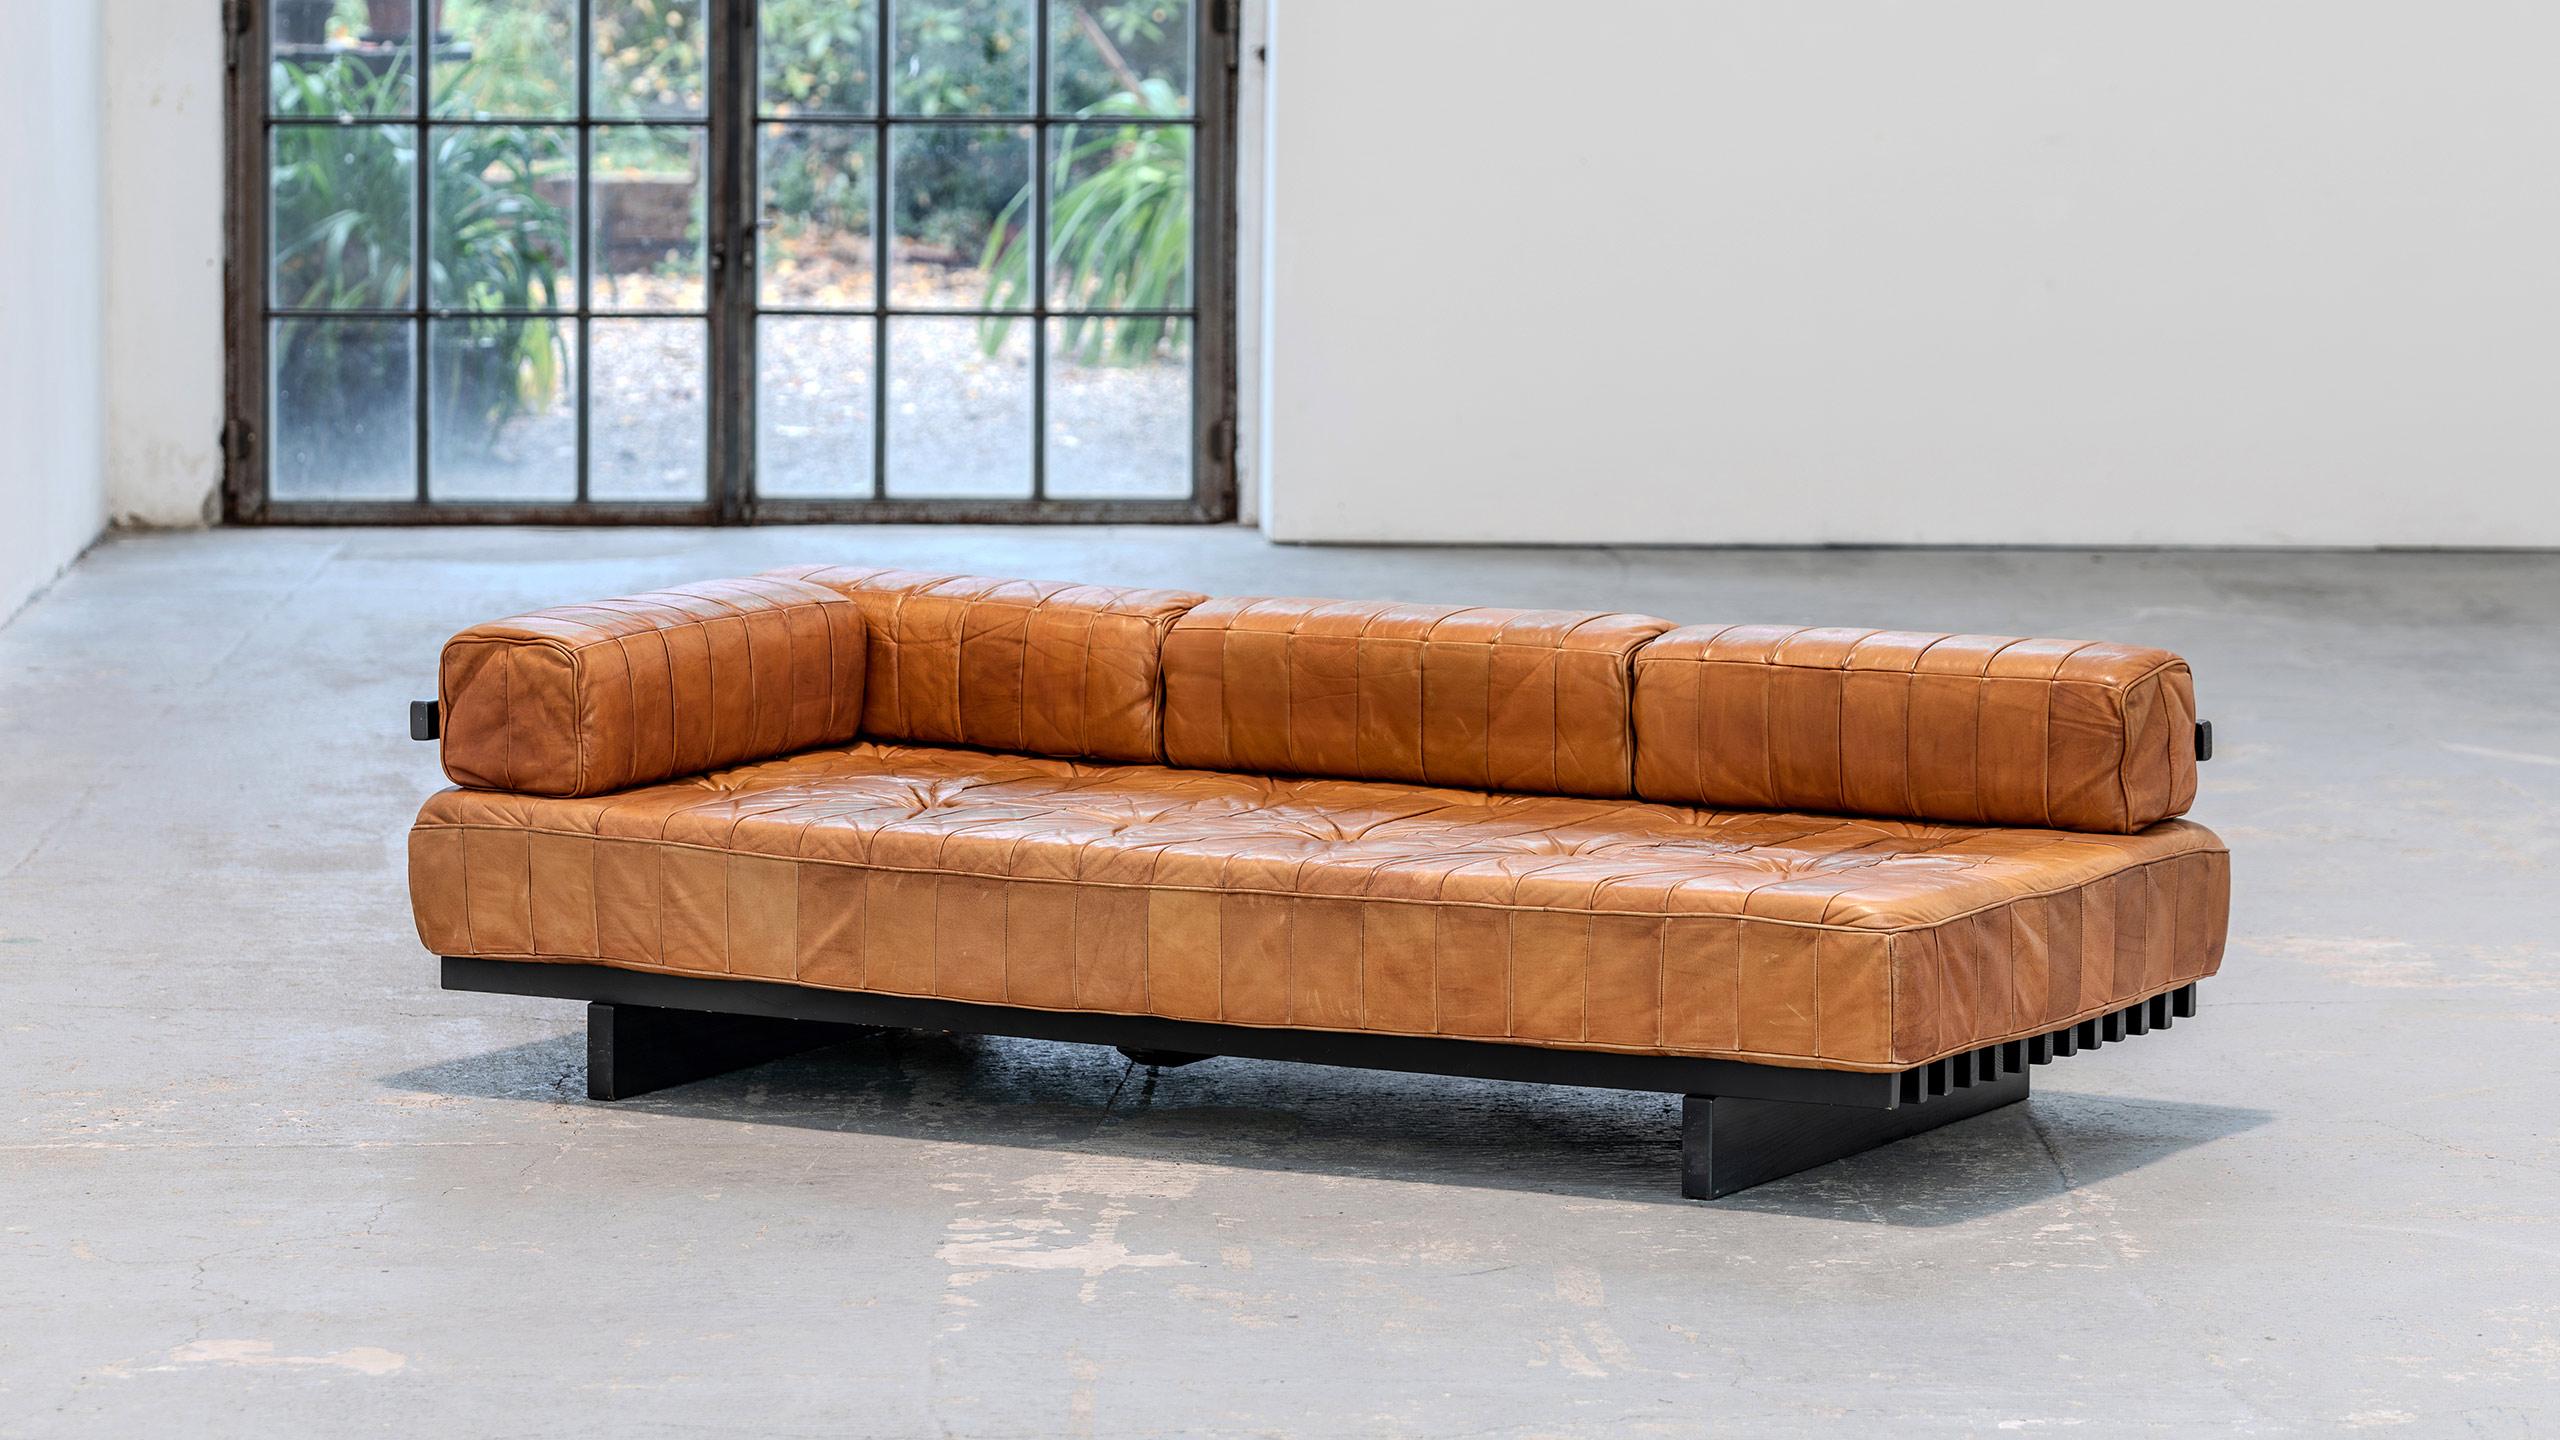 De Sede - DS 80 Sofa + Daybed in cognac patchwork leather
1973 by De Sede Design Team

De Sede DS-80 Patchwork Daybed with armrest.
The daybed has a black lacquered wooden slatted frame, the backrest and armrest of which can be freely positioned and